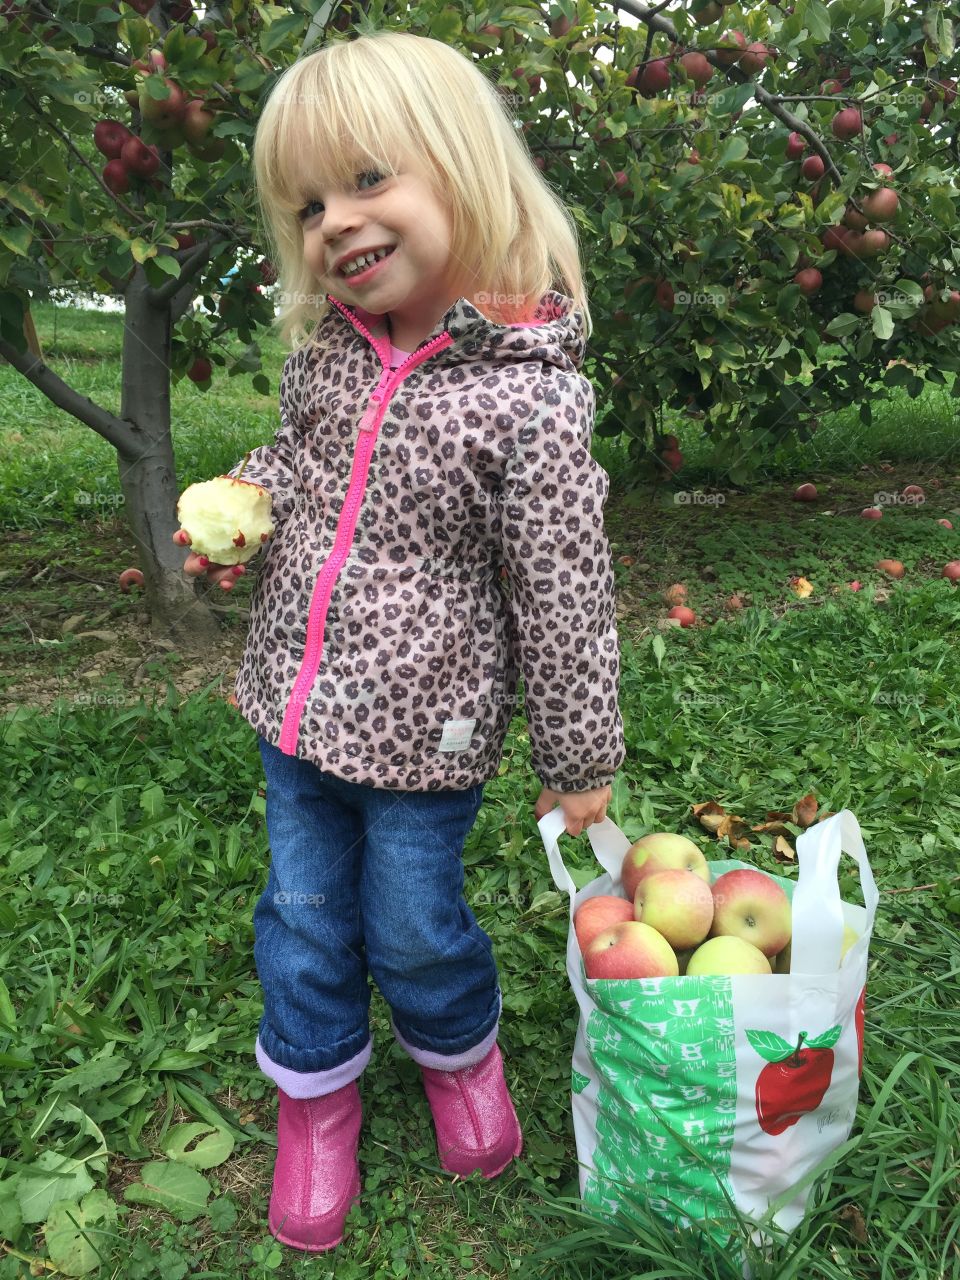 Girl standing with many apples in plastic bag